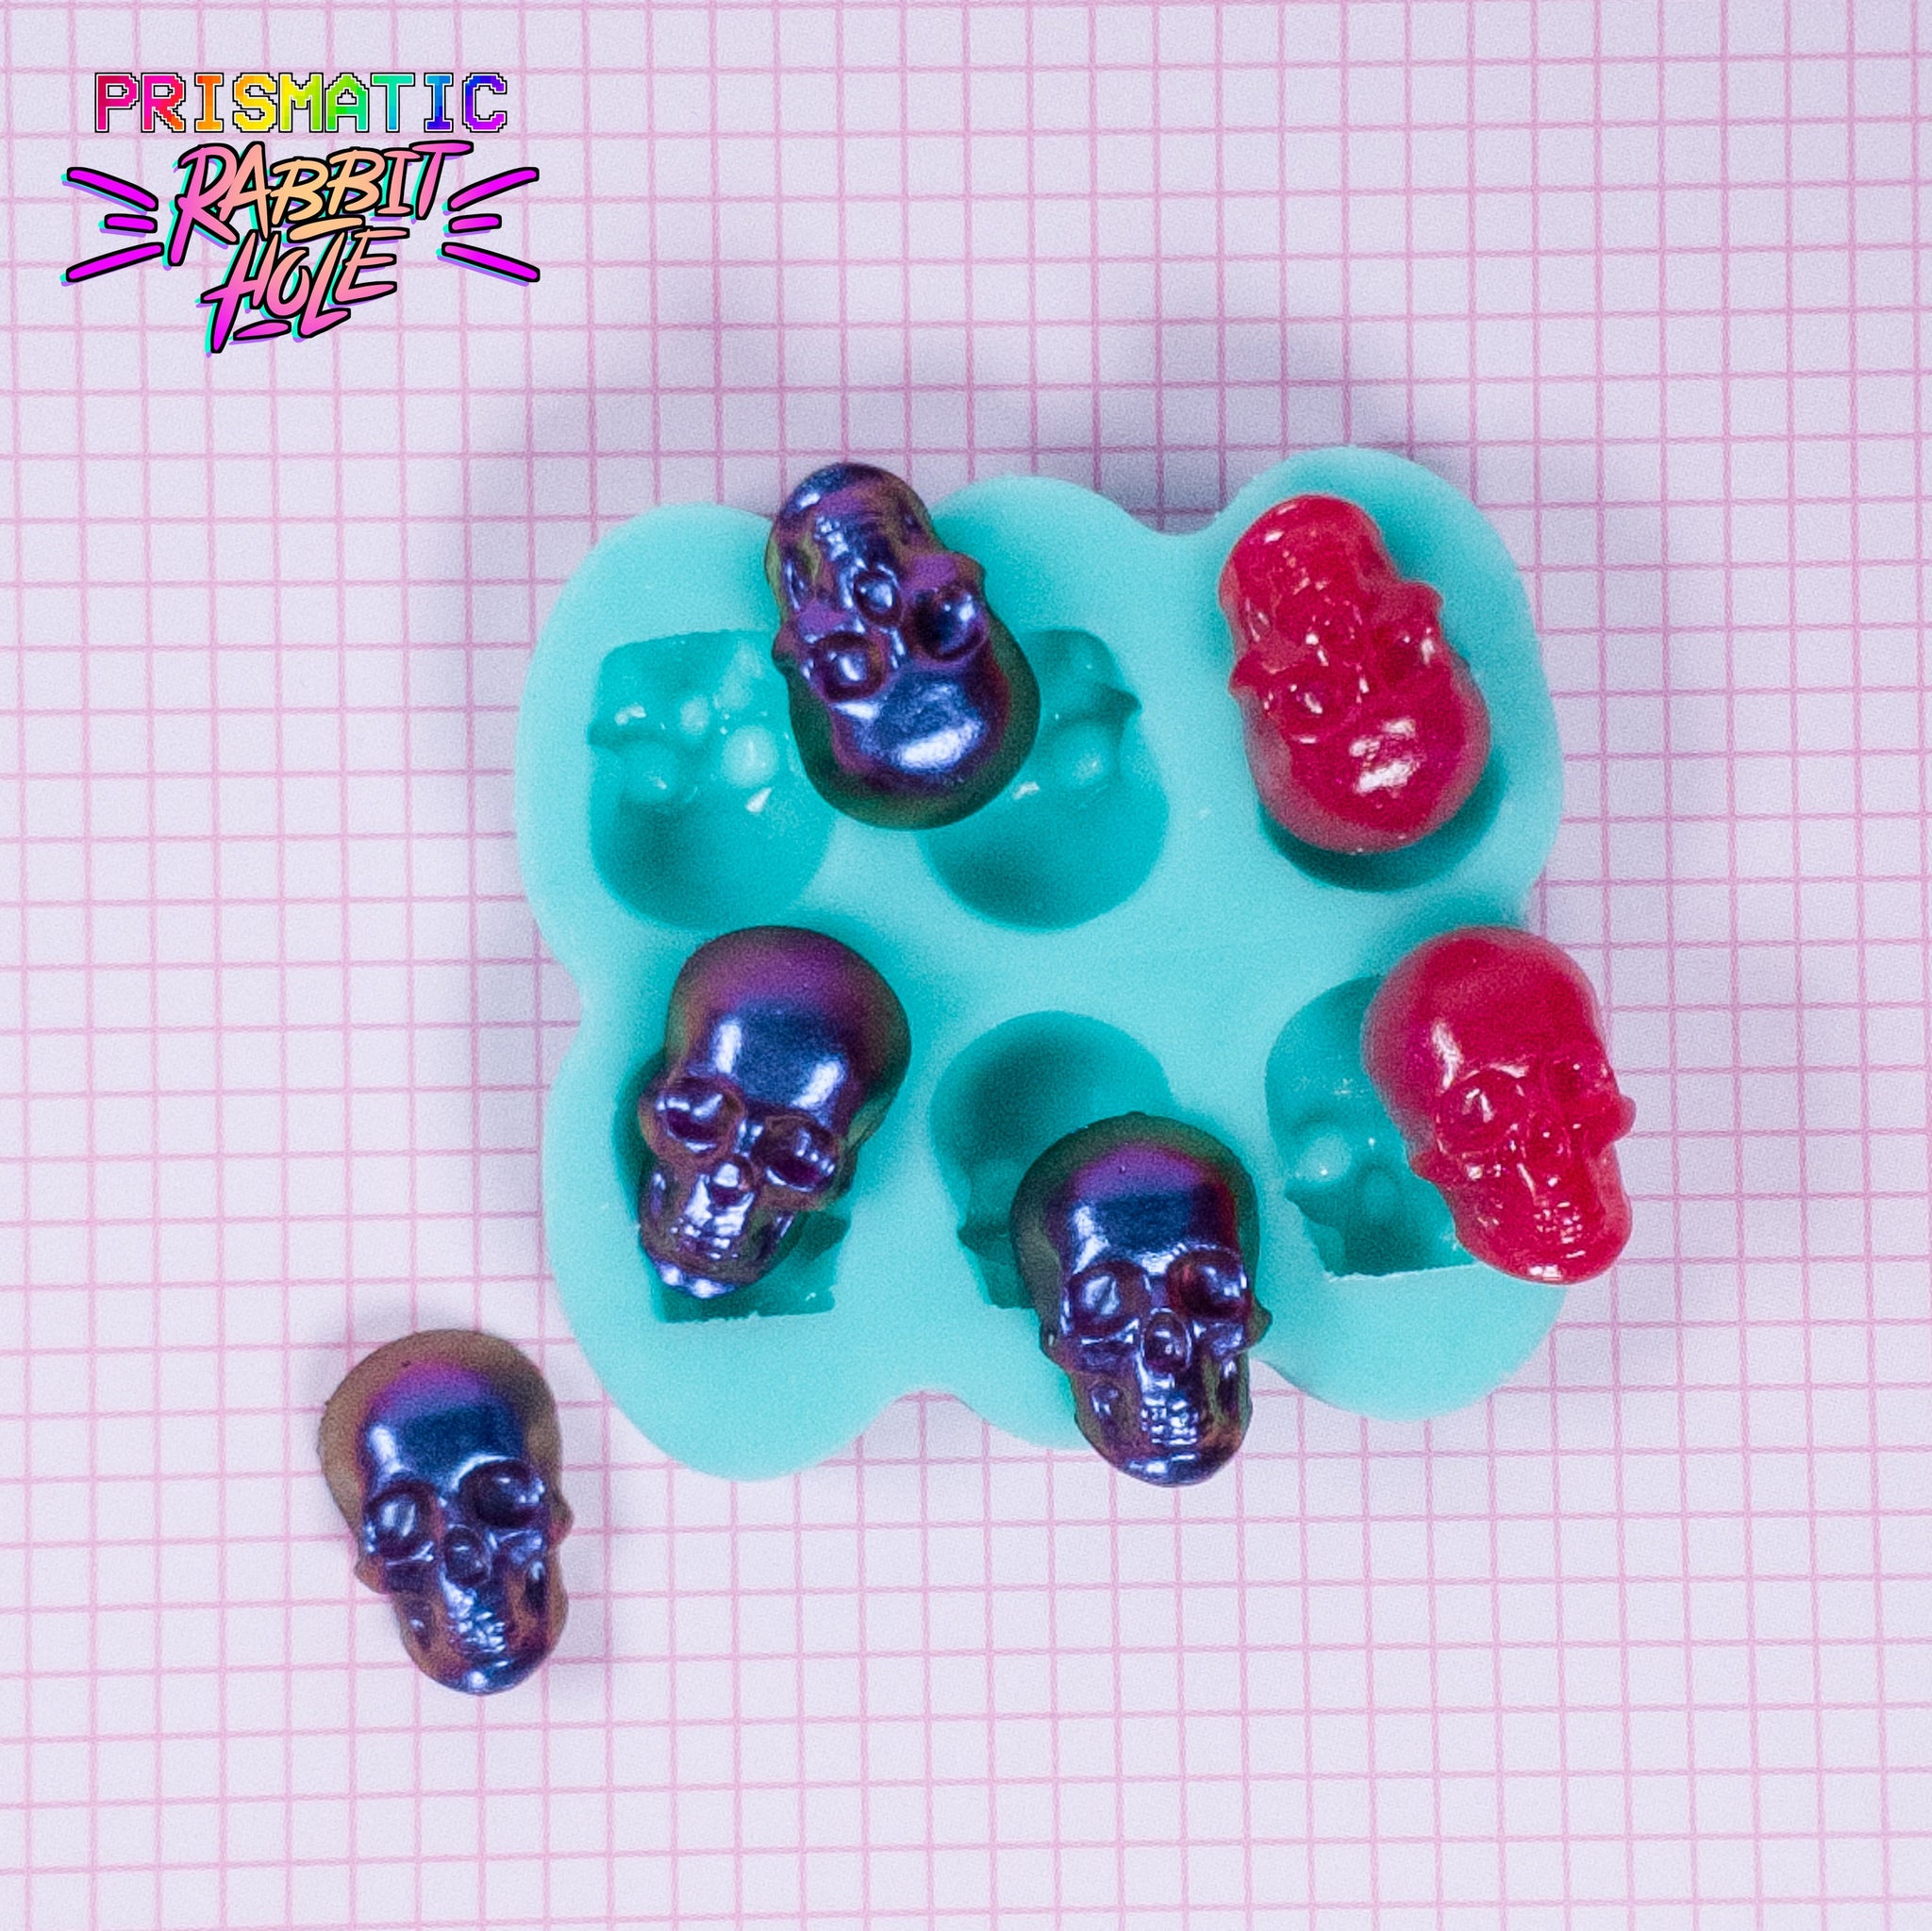 Crafted Elements 6.9x5.2x2.4 3D Partial Skull Silicone Mold